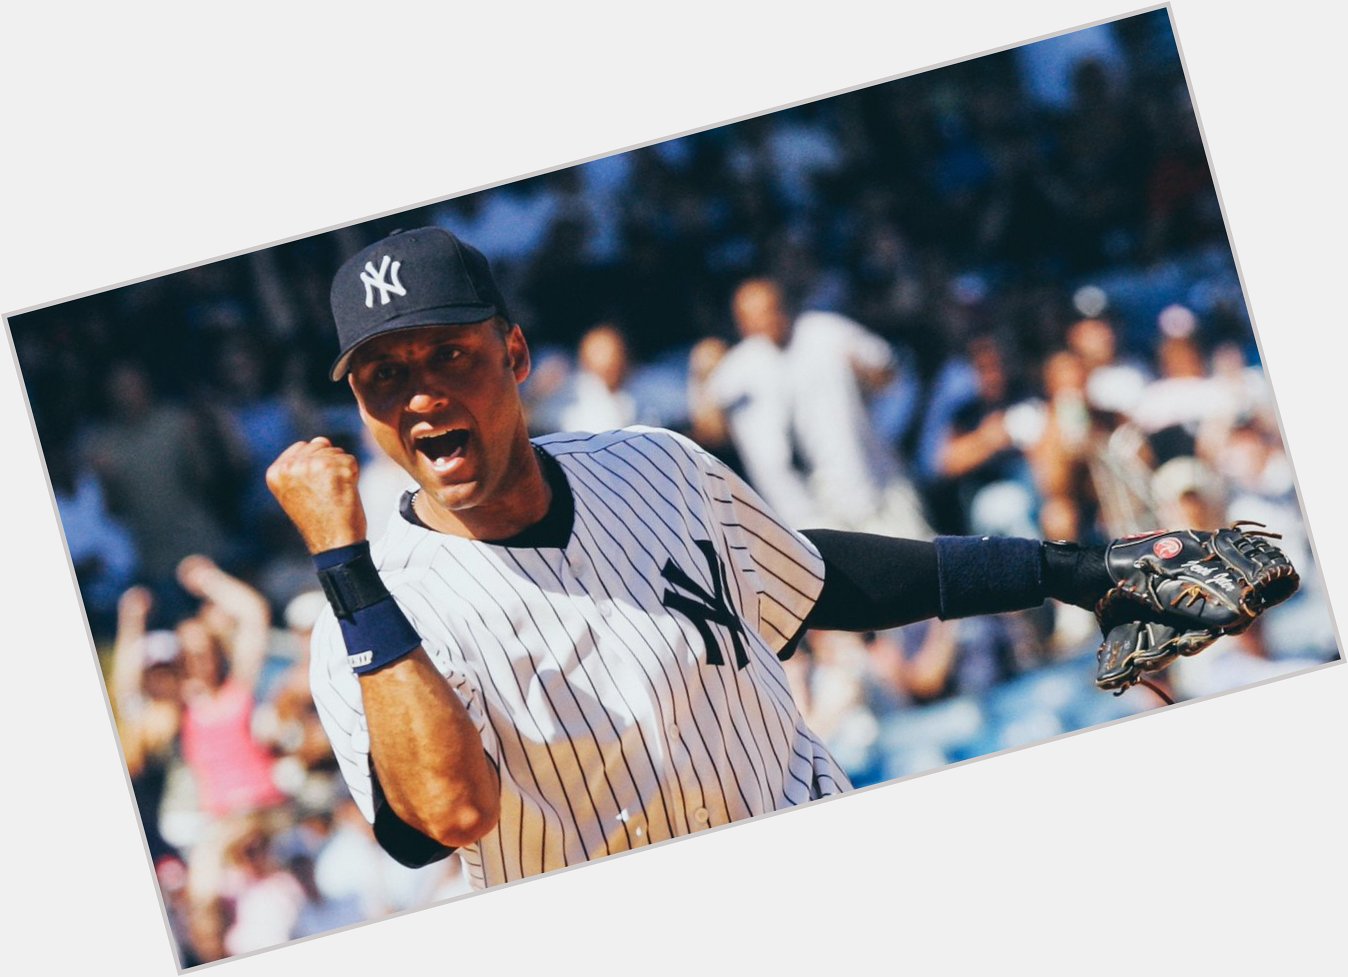 Happy 45th birthday to 14-time Derek Jeter!

No player has more hits (200) than The Captain. 